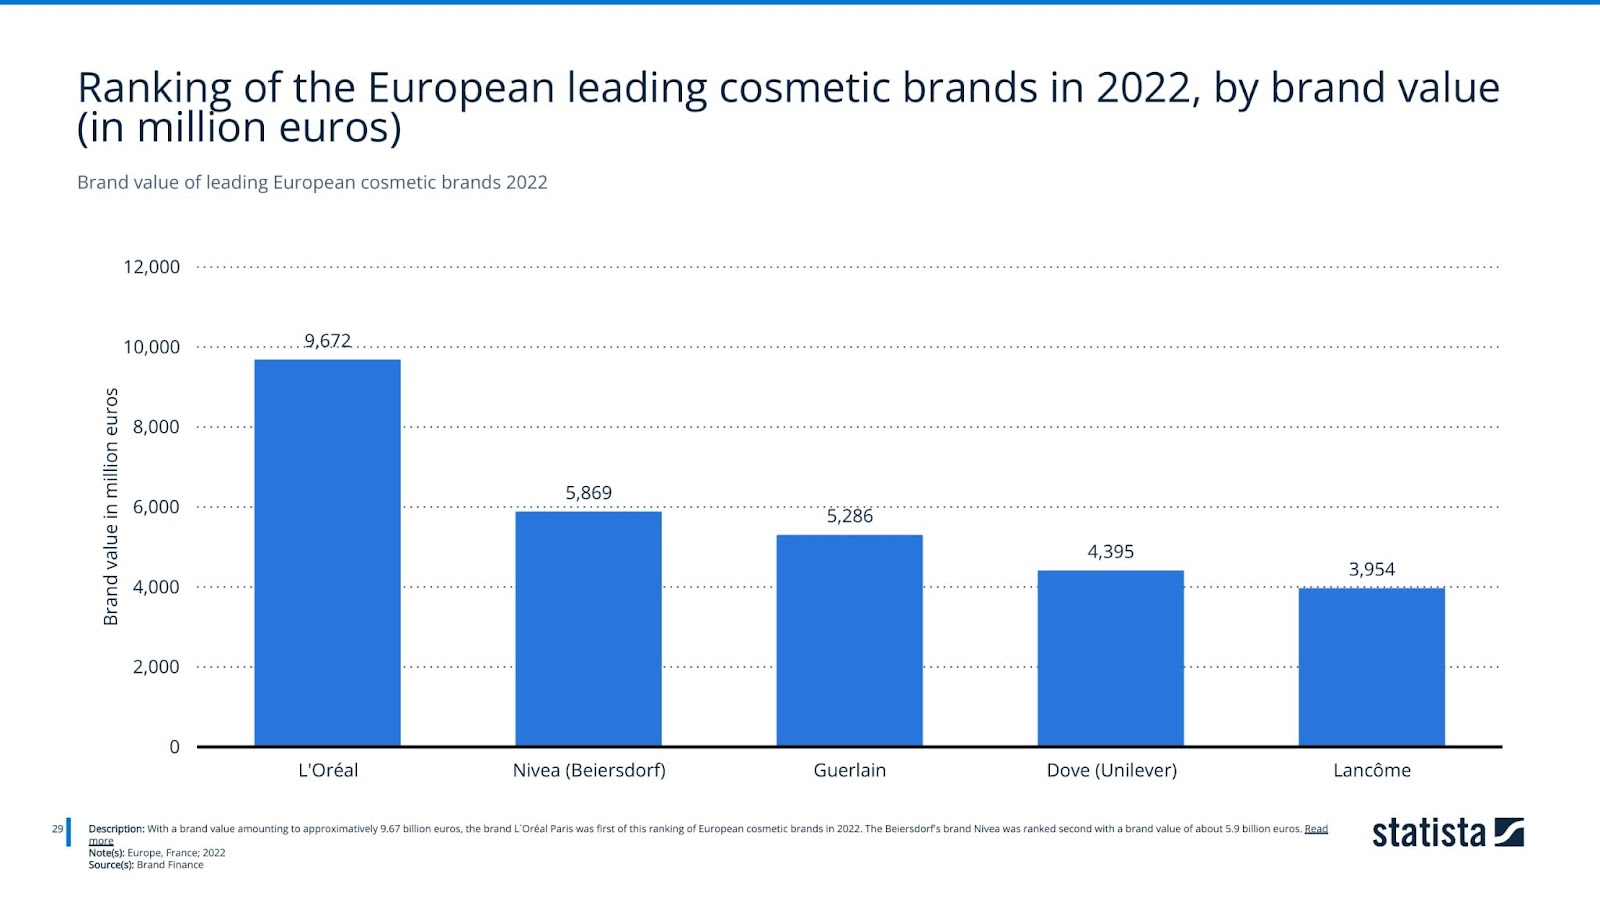 Brand value of leading European cosmetic brands 2022